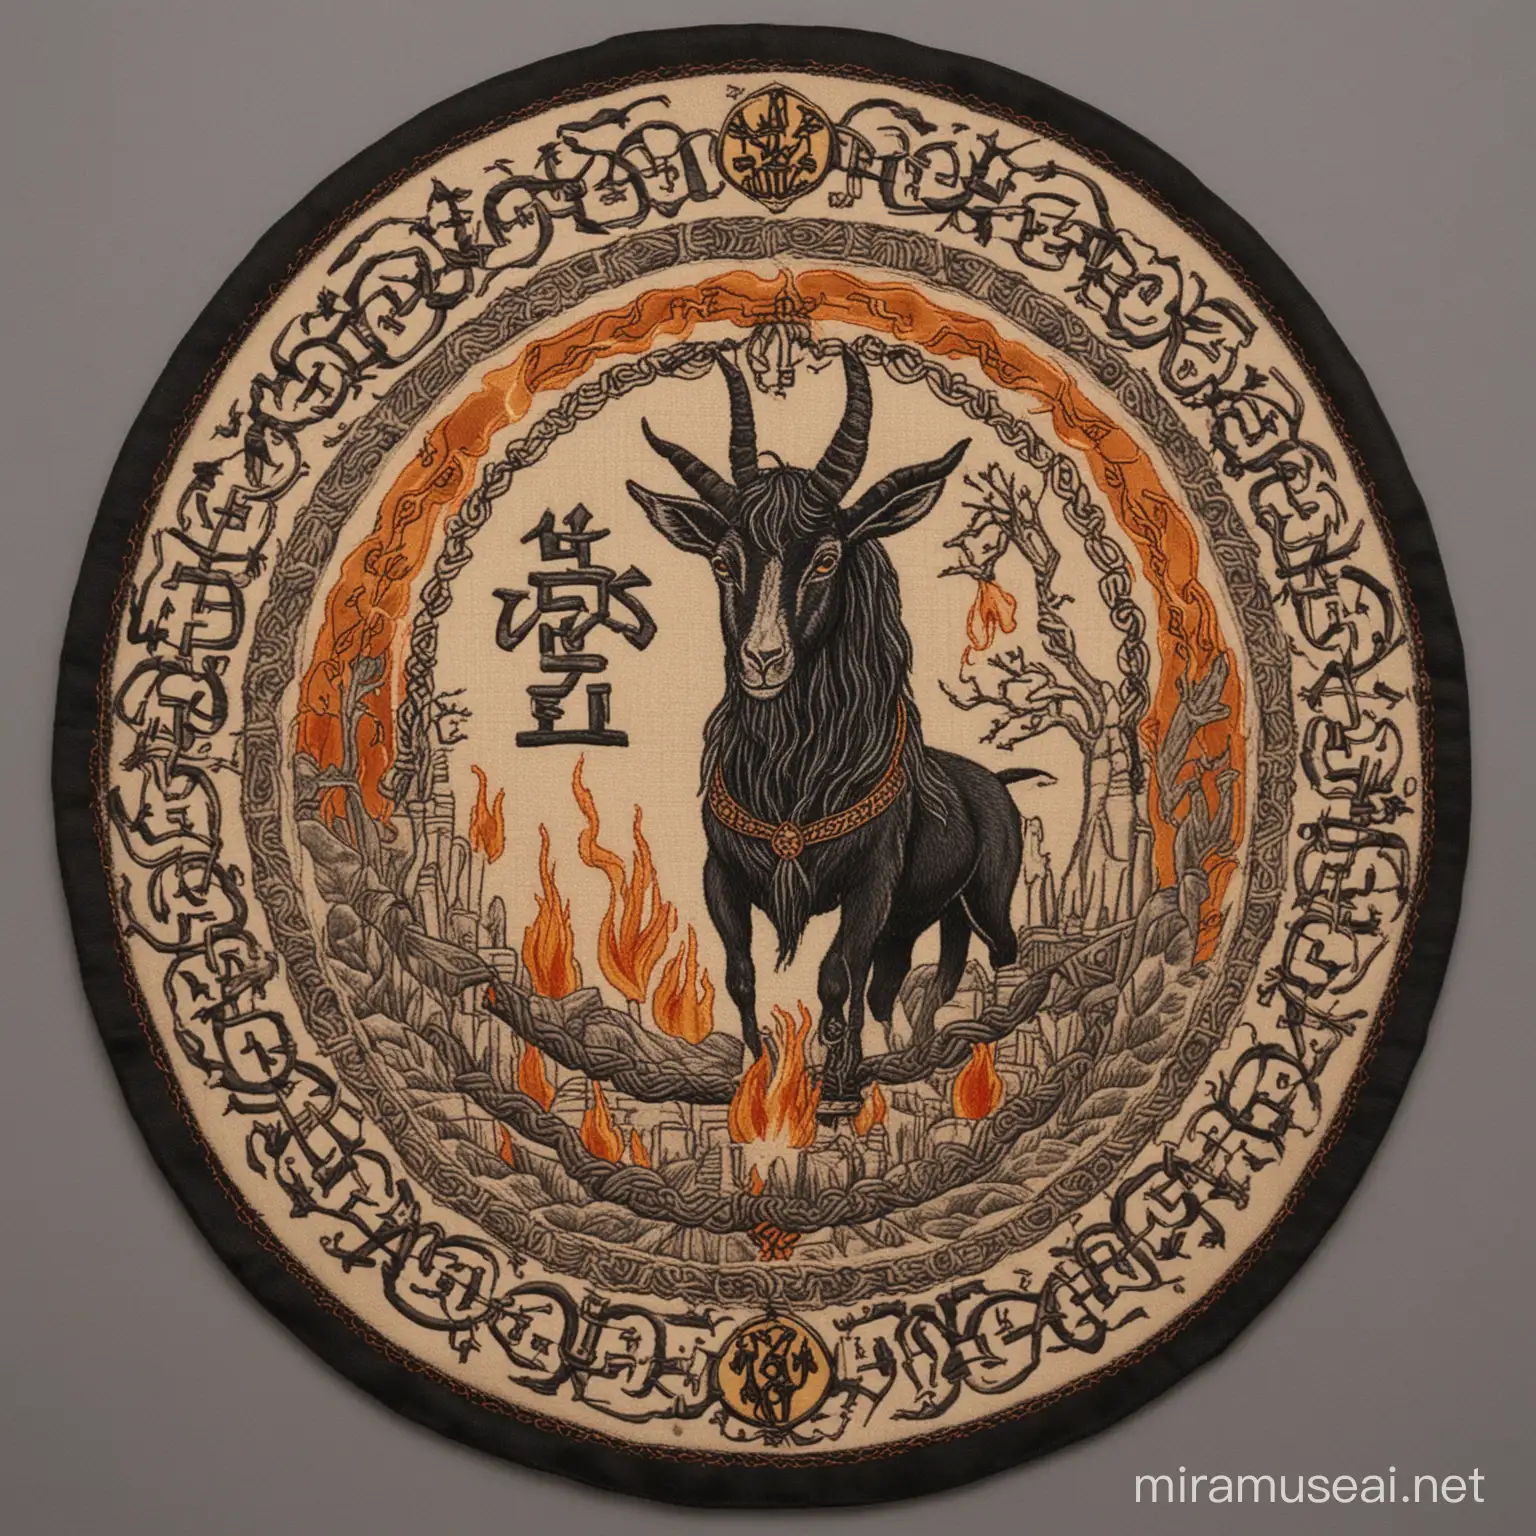 large oval embroidered patch depicting a robed figure with the head of a goat in the center, hovering over a fire made of snakes, ancient runes on either side, a skeletal horse in an arch above, the tattoo markings on the witch of ages, worn and aged, coarse, black thread, canvas backing